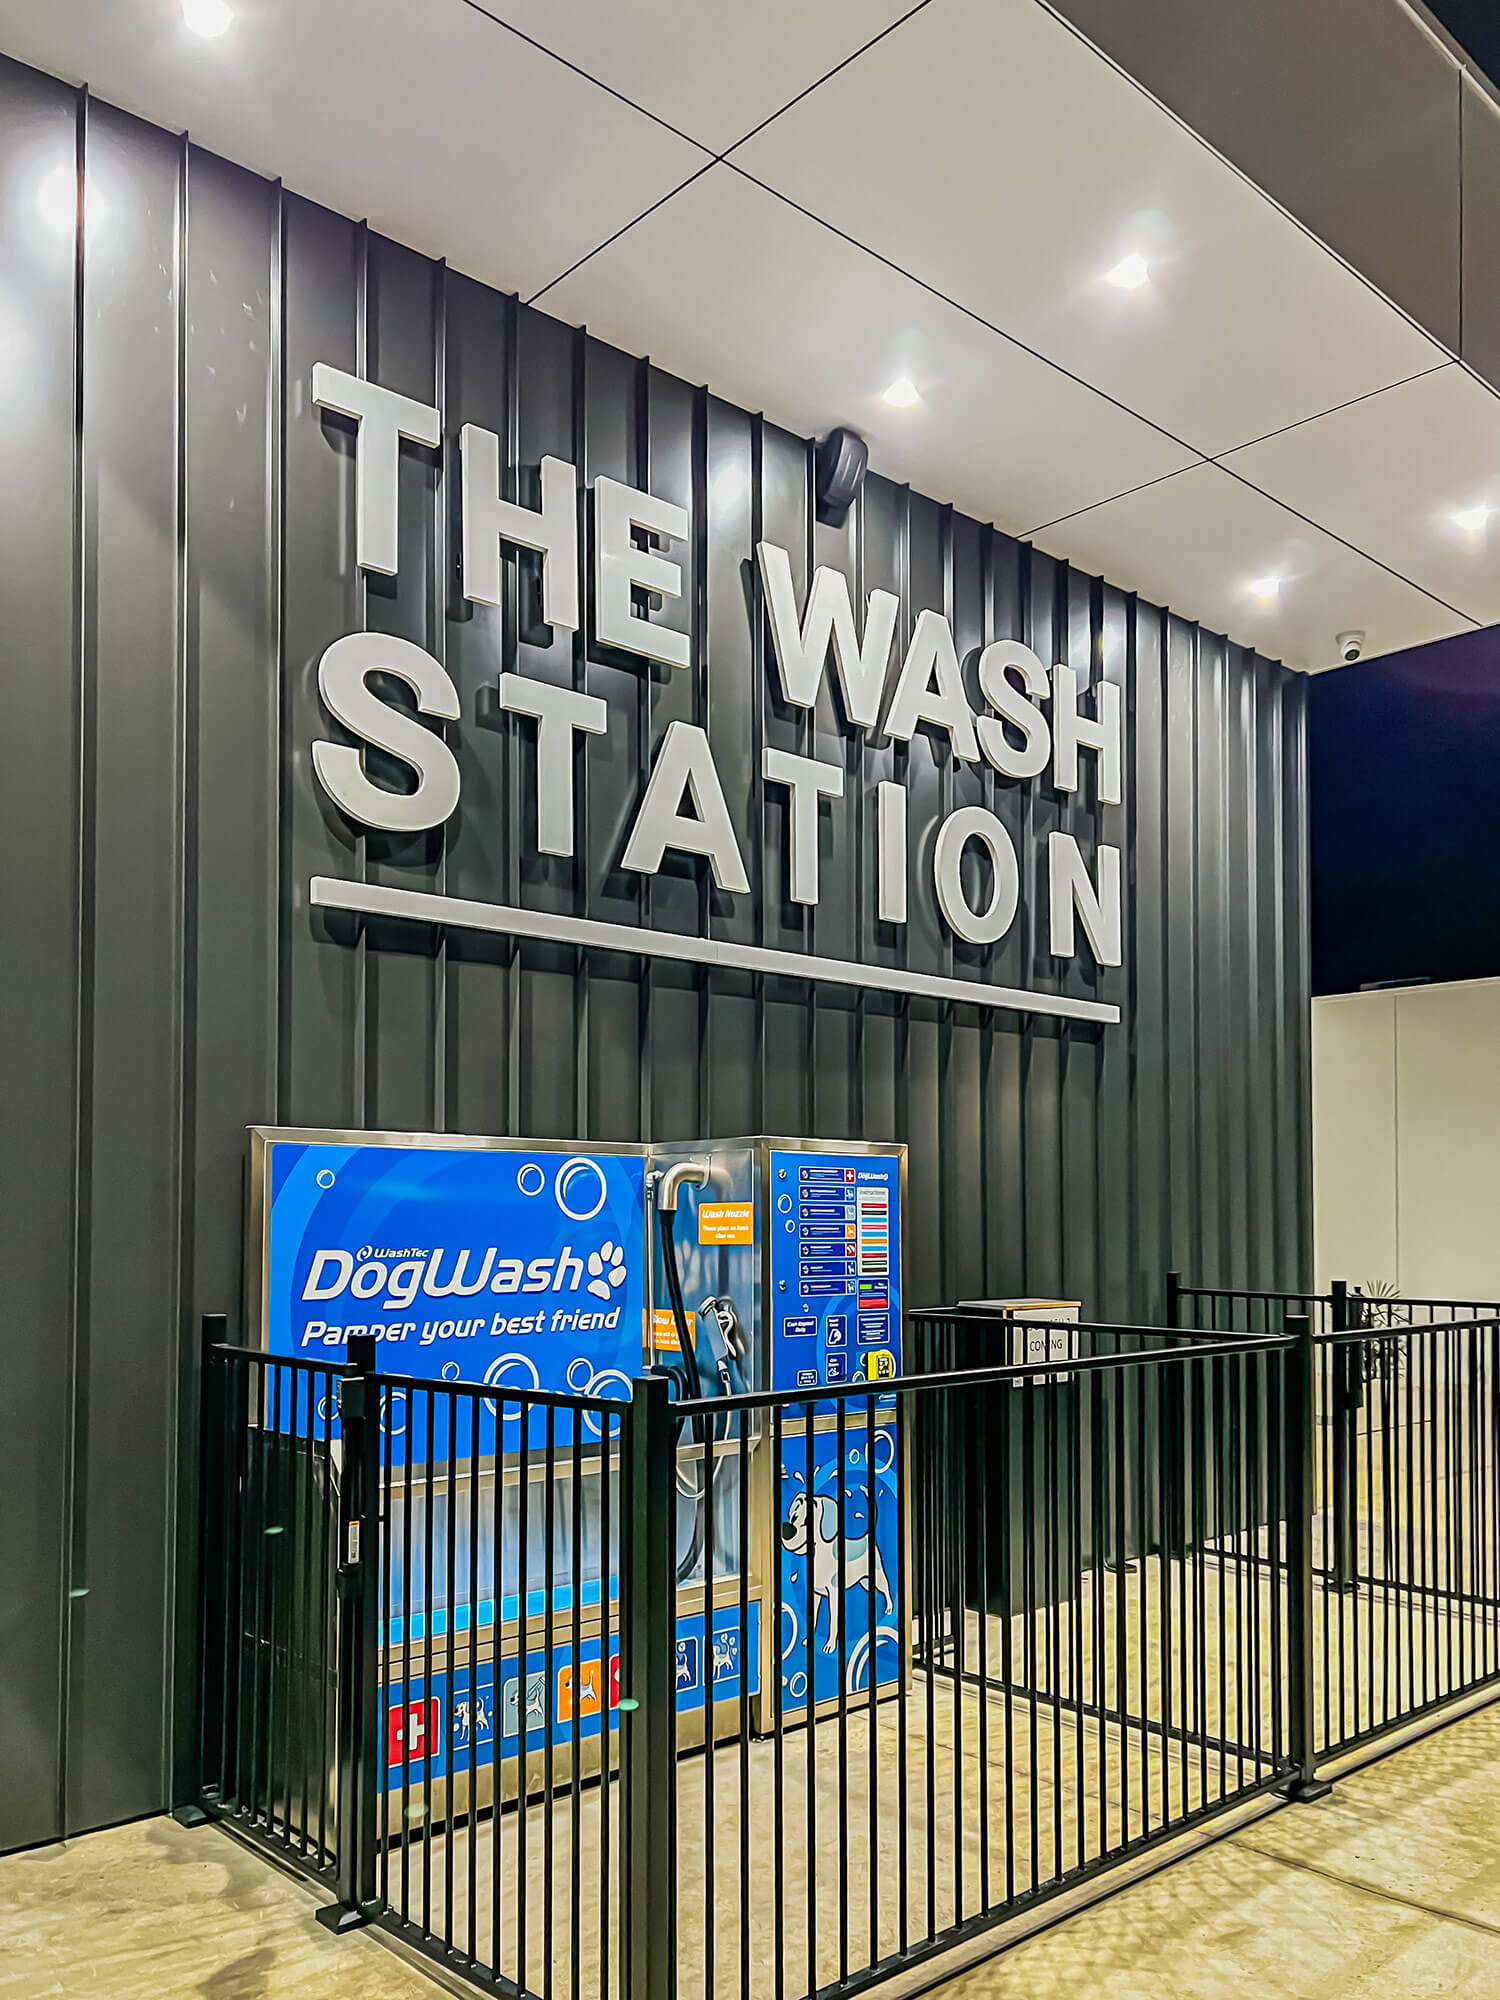 Photo of a large sign with white letters on a grey wall, the sign says 'The Wash Station'. Under the sign is a dog bath system with a black fence around it